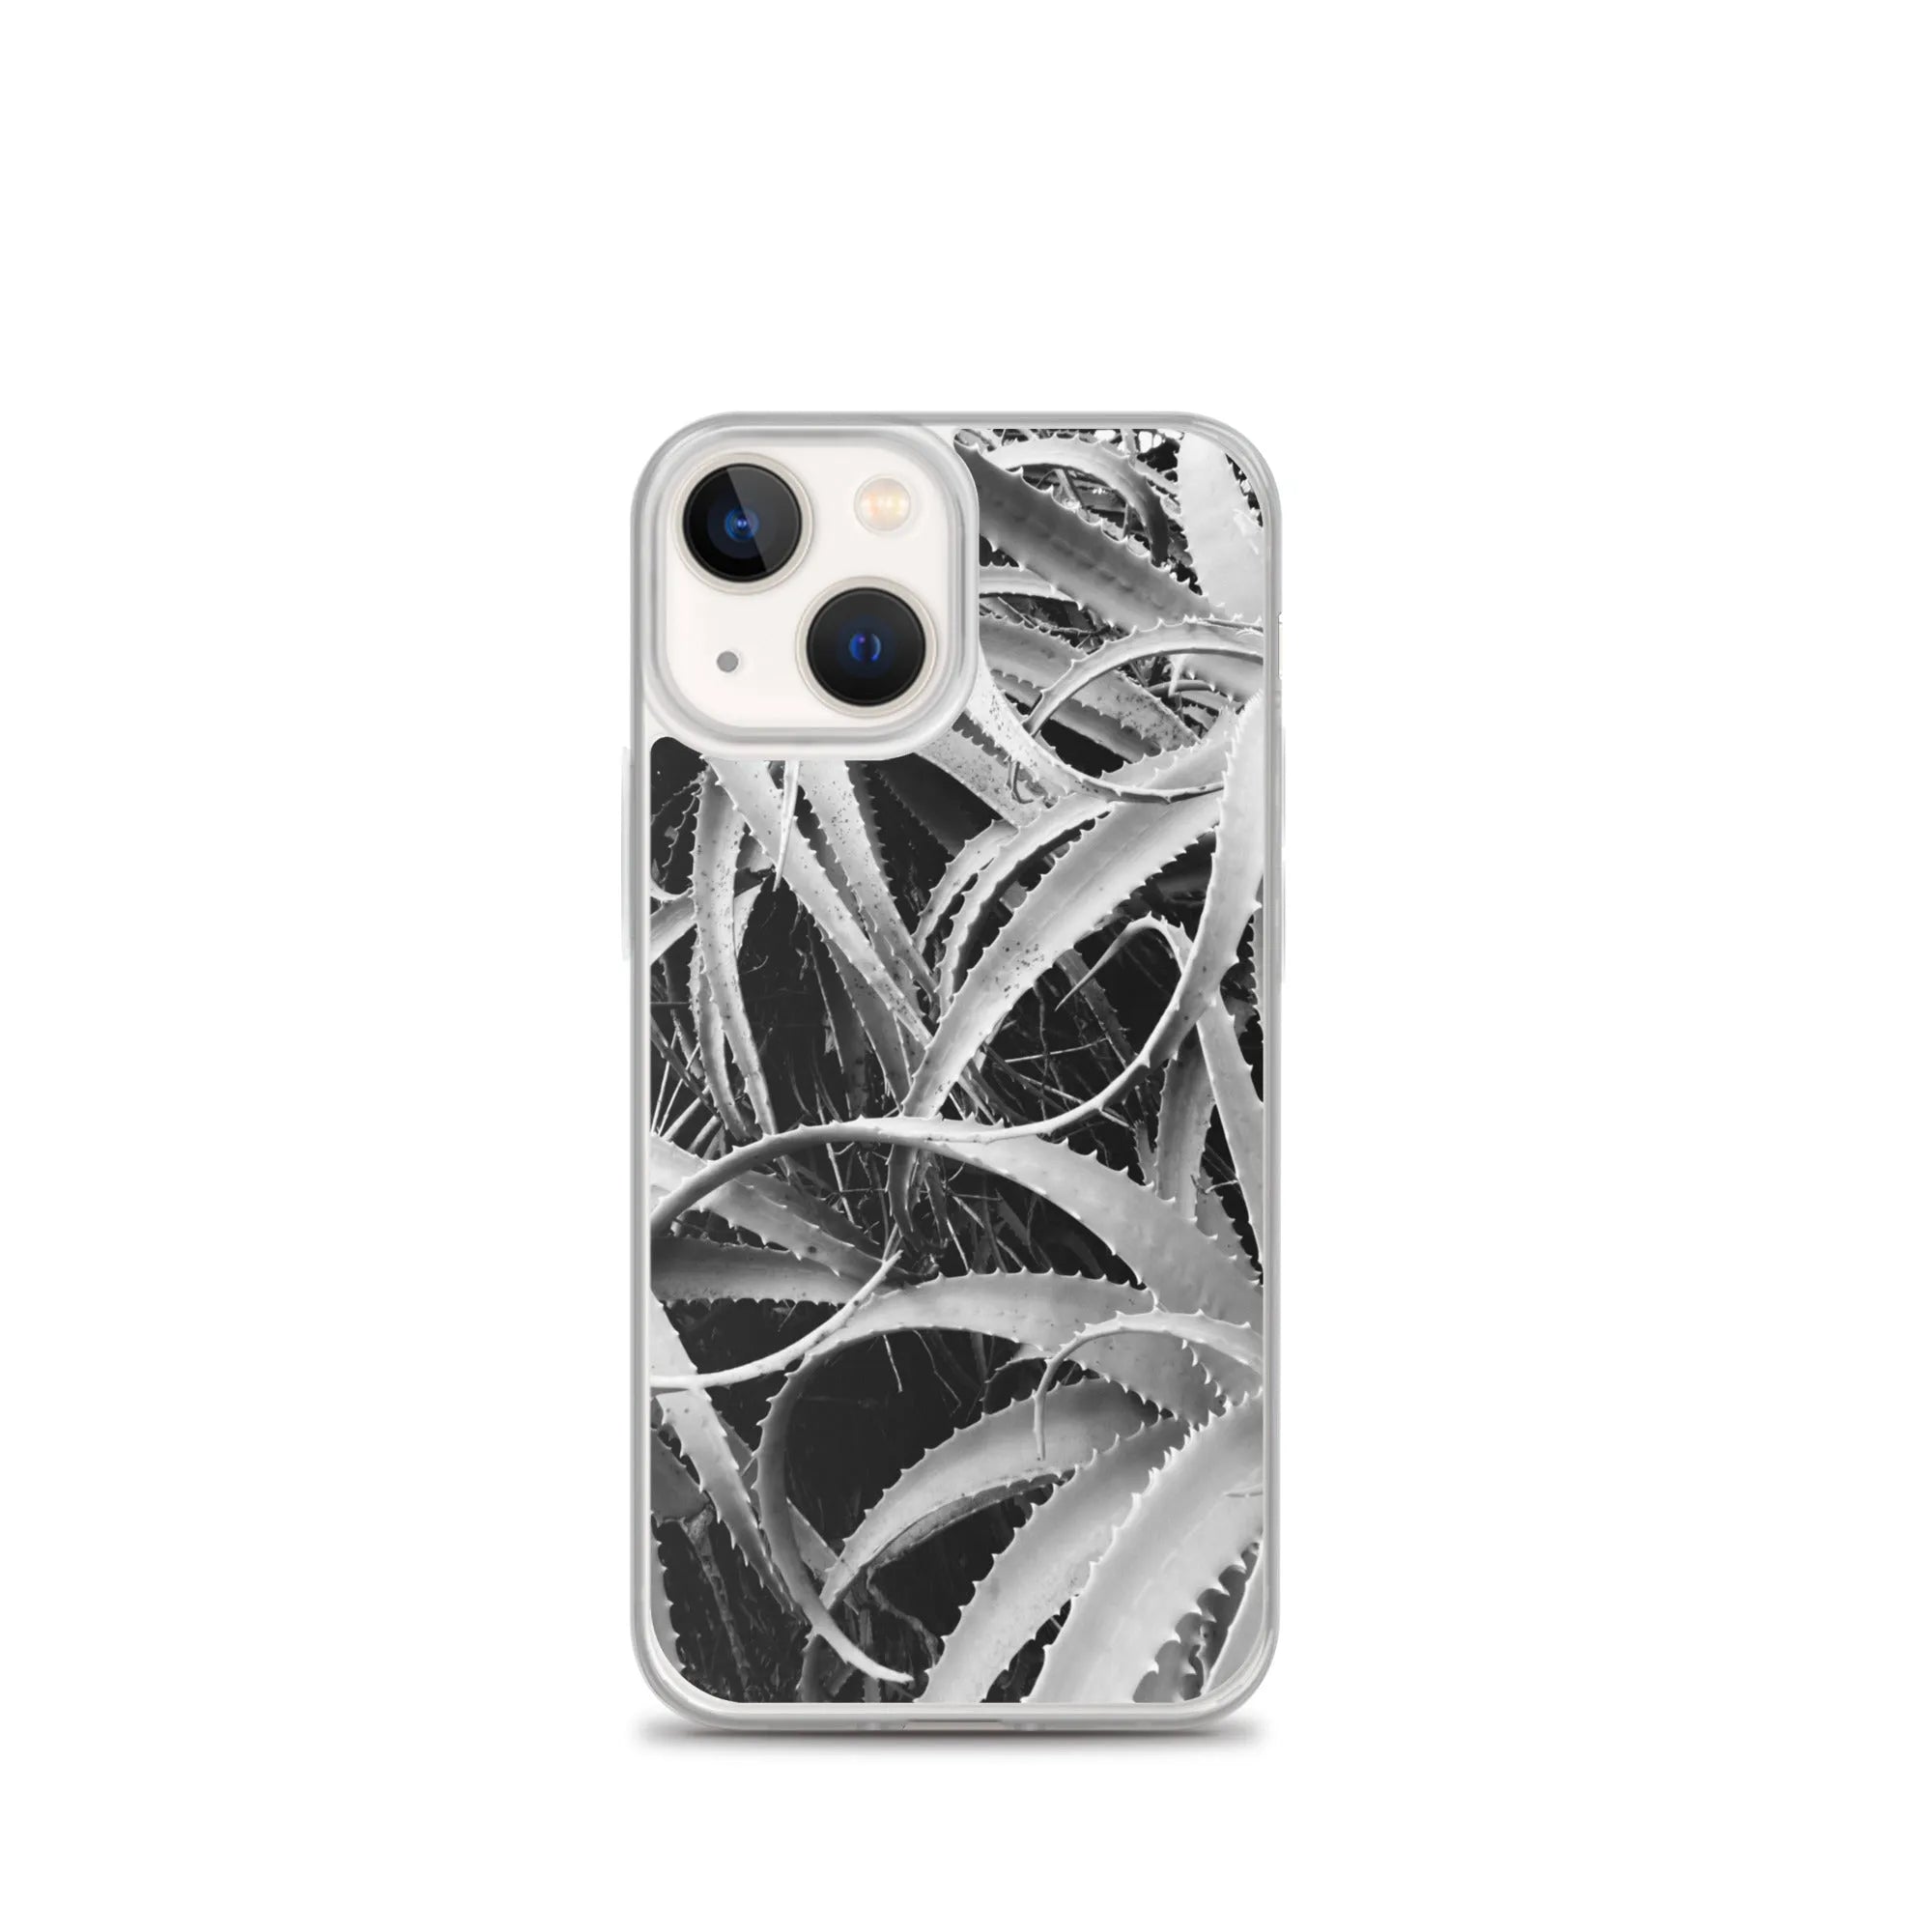 Spiked 2 + Too Botanical Art Iphone Case - Black And White - Iphone 13 Mini - Mobile Phone Cases - Aesthetic Art